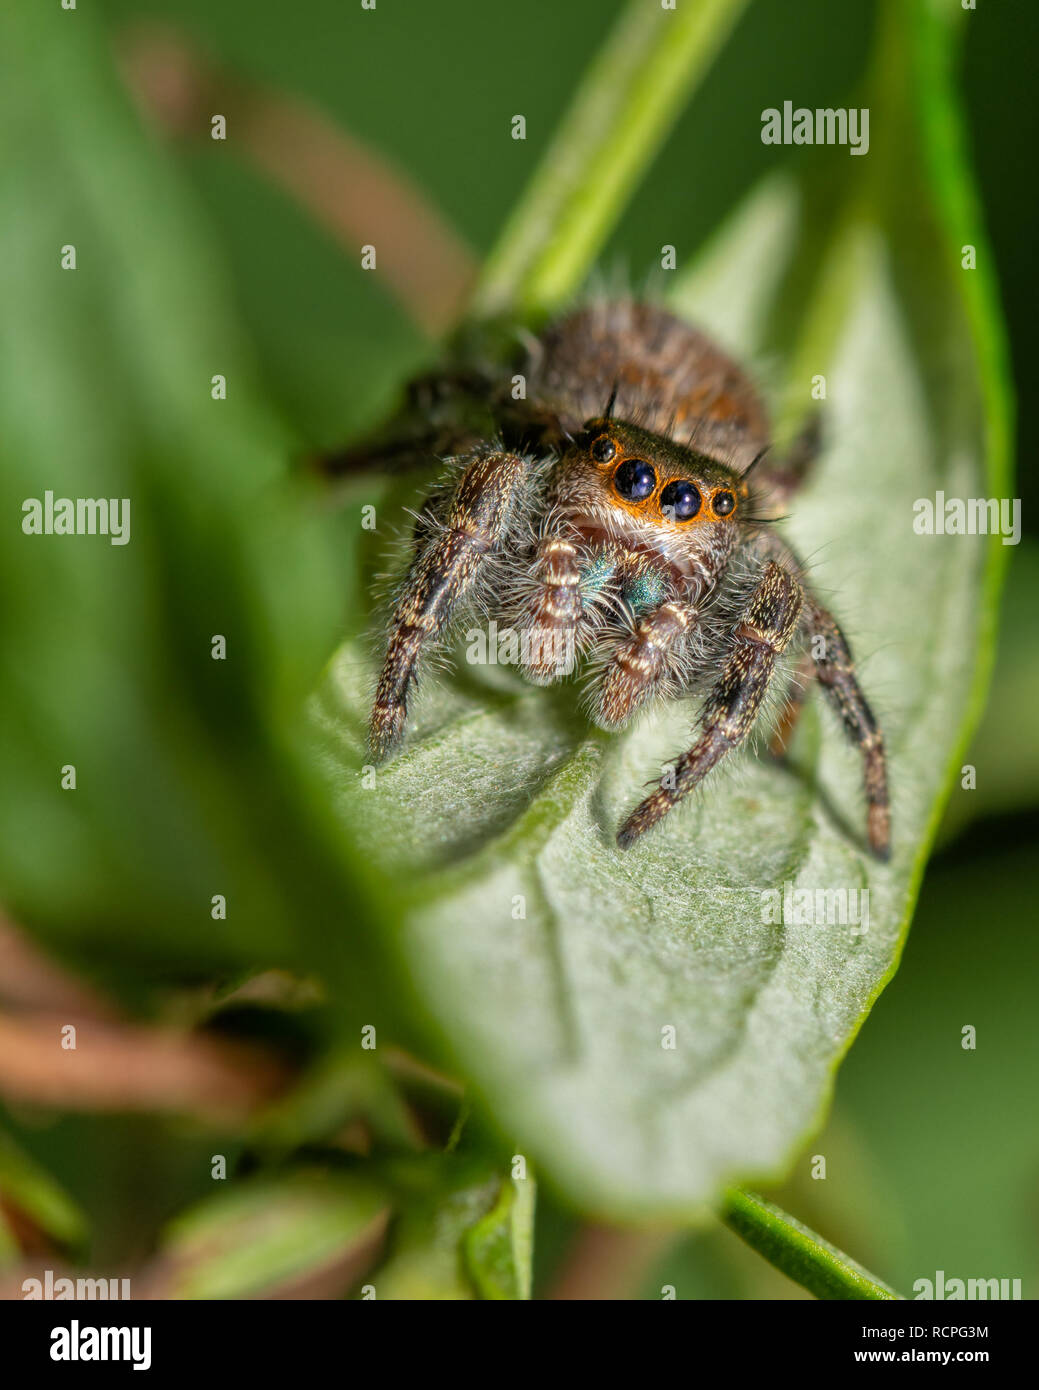 Adorable Phidippus princeps, Sinuous Tufted Jumping spider sitting on a leaf in fall garden, looking at the viewer with curiosity Stock Photo